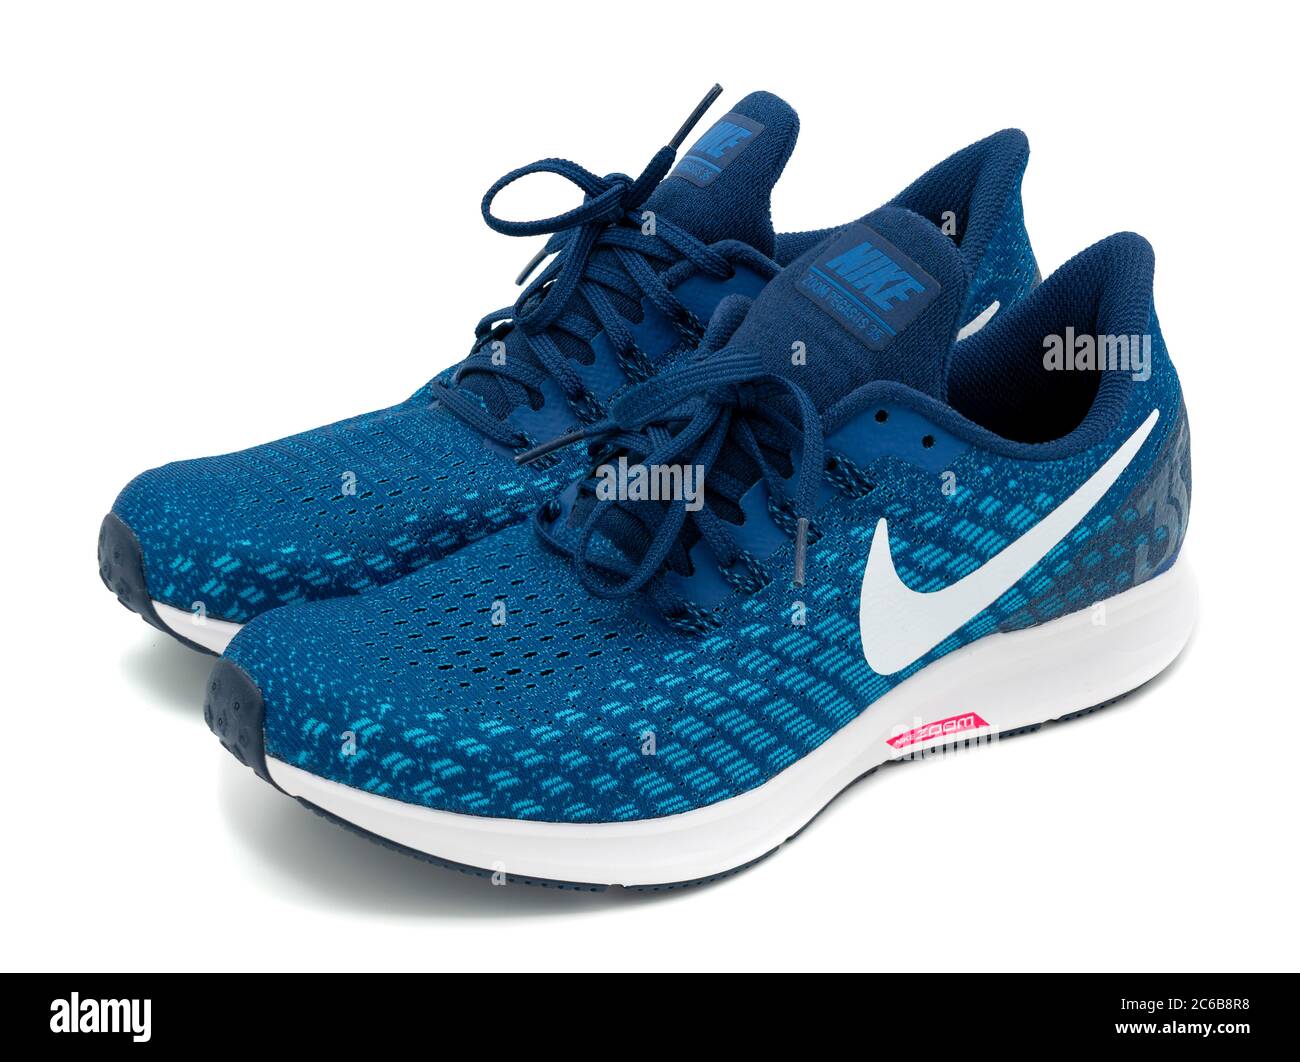 Page 2 - Nike Footwear High Resolution Stock Photography and Images - Alamy